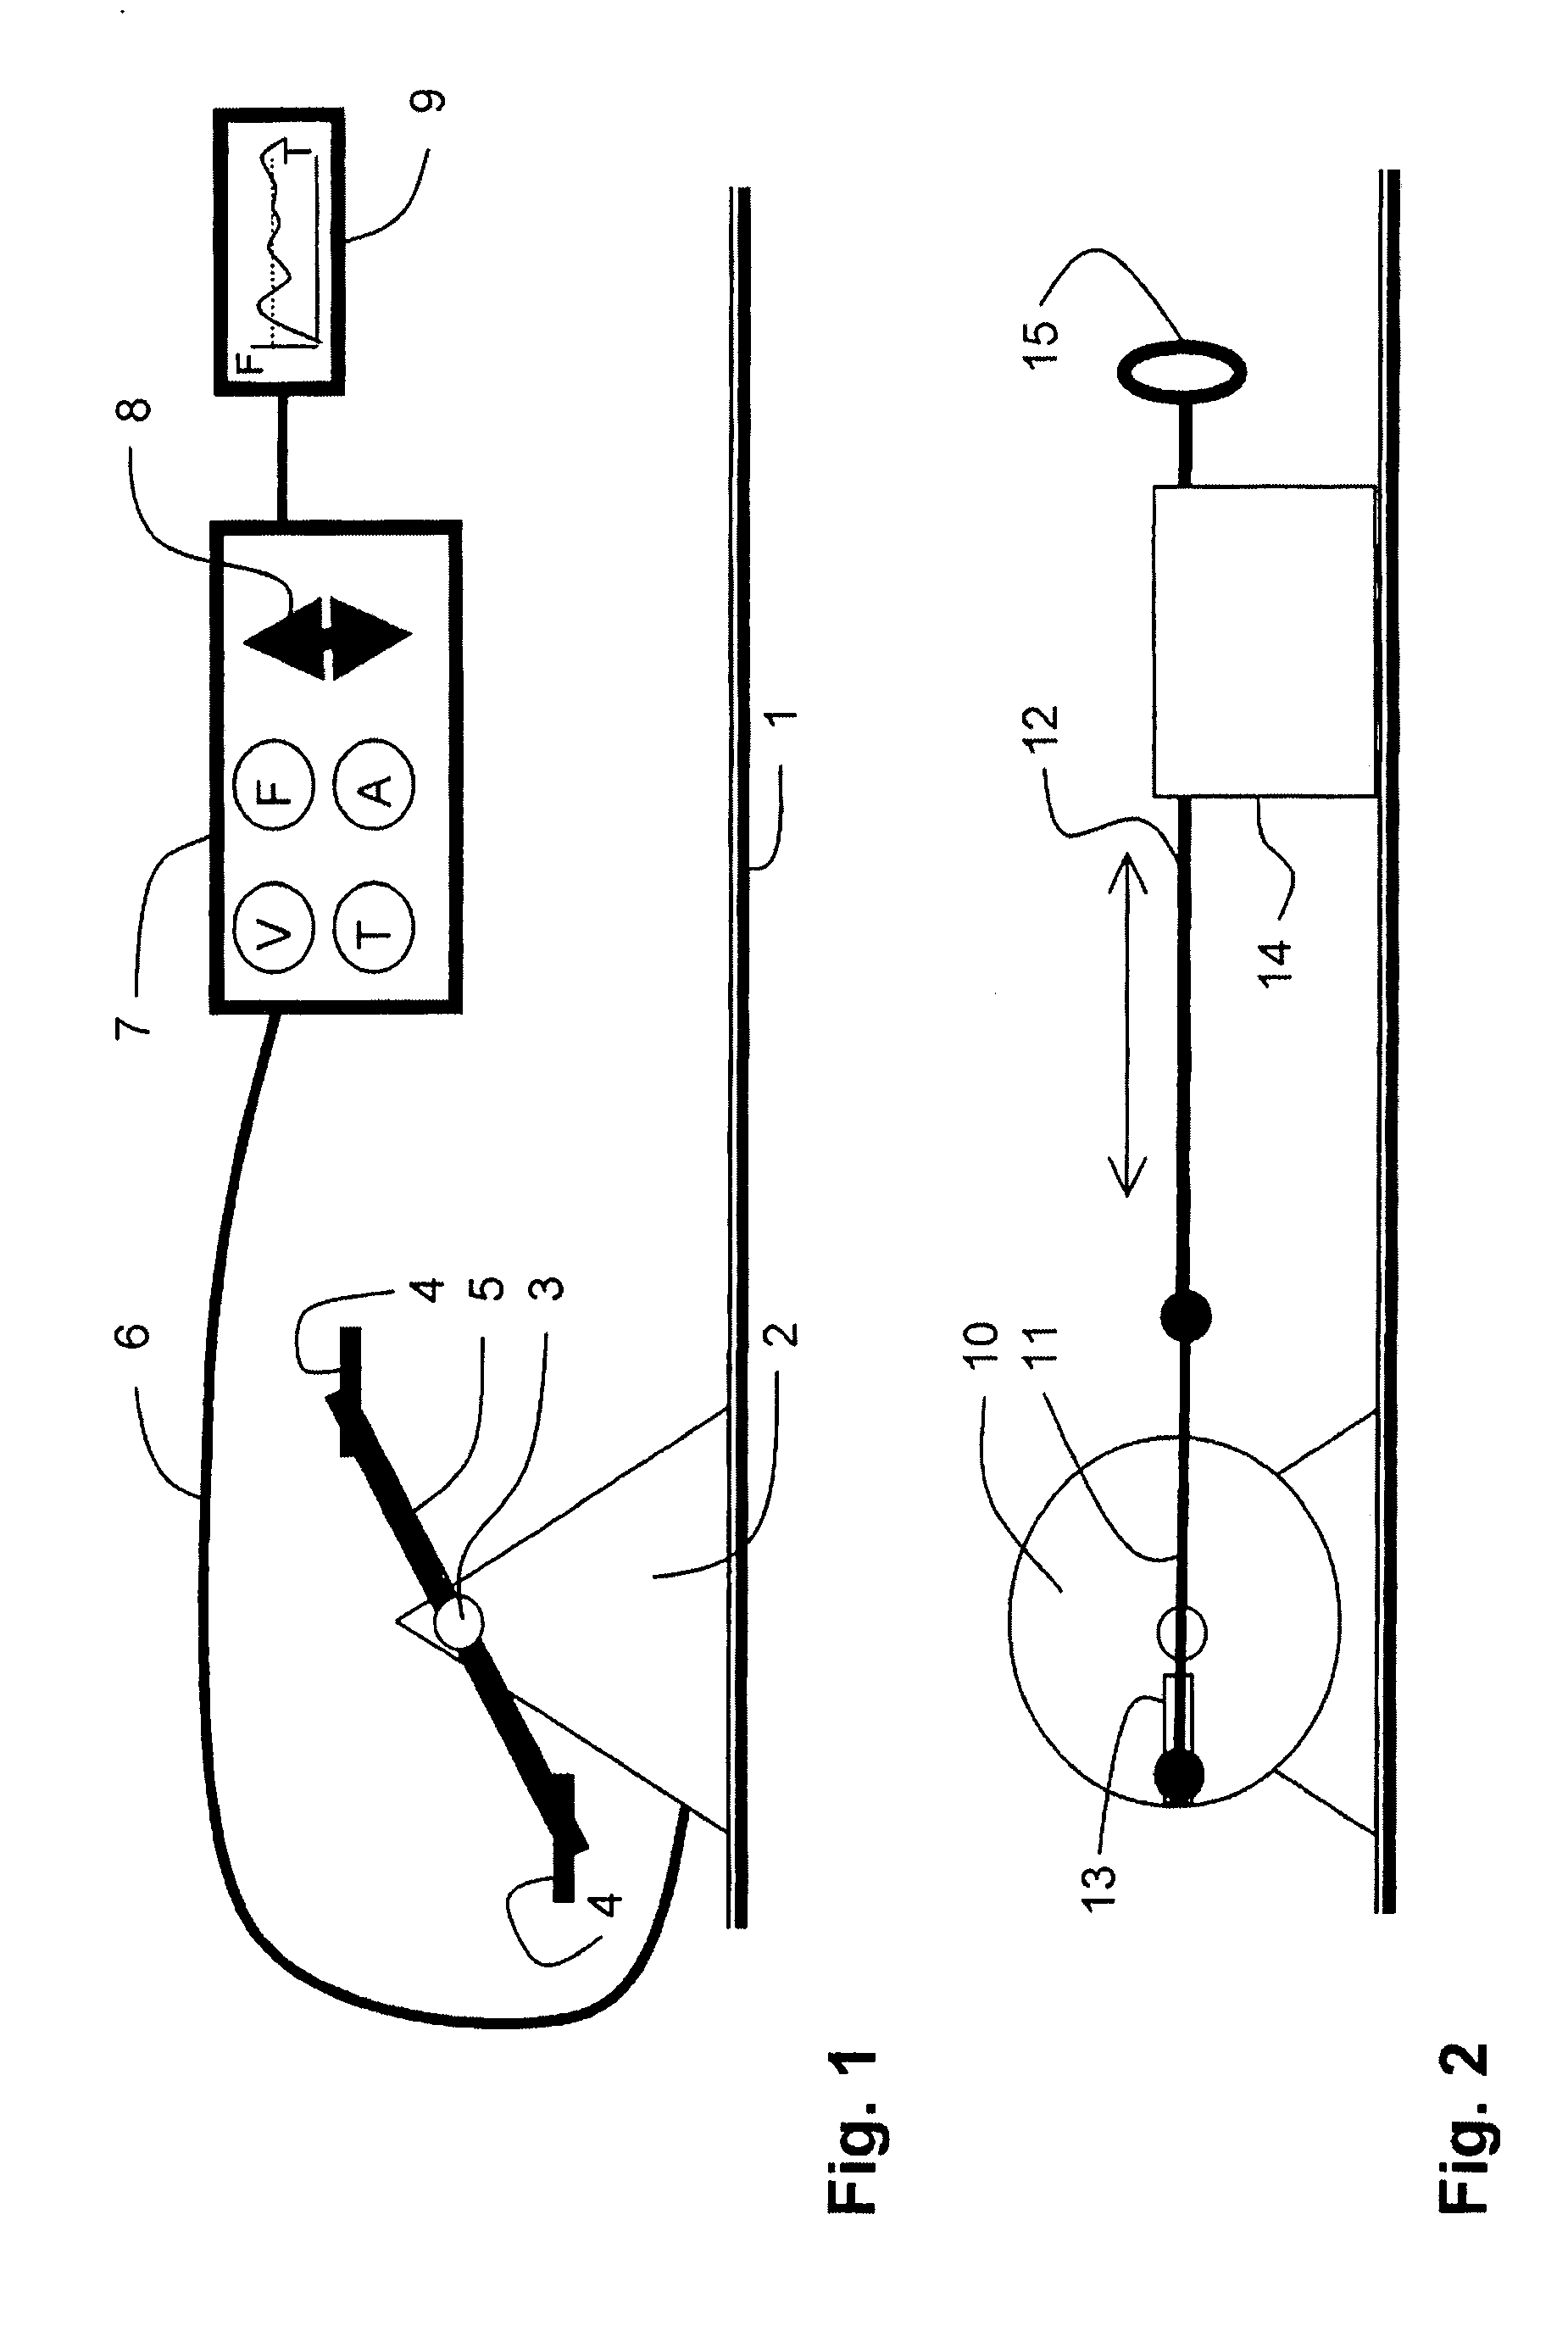 Method and apparatus for controlling repetitive movements